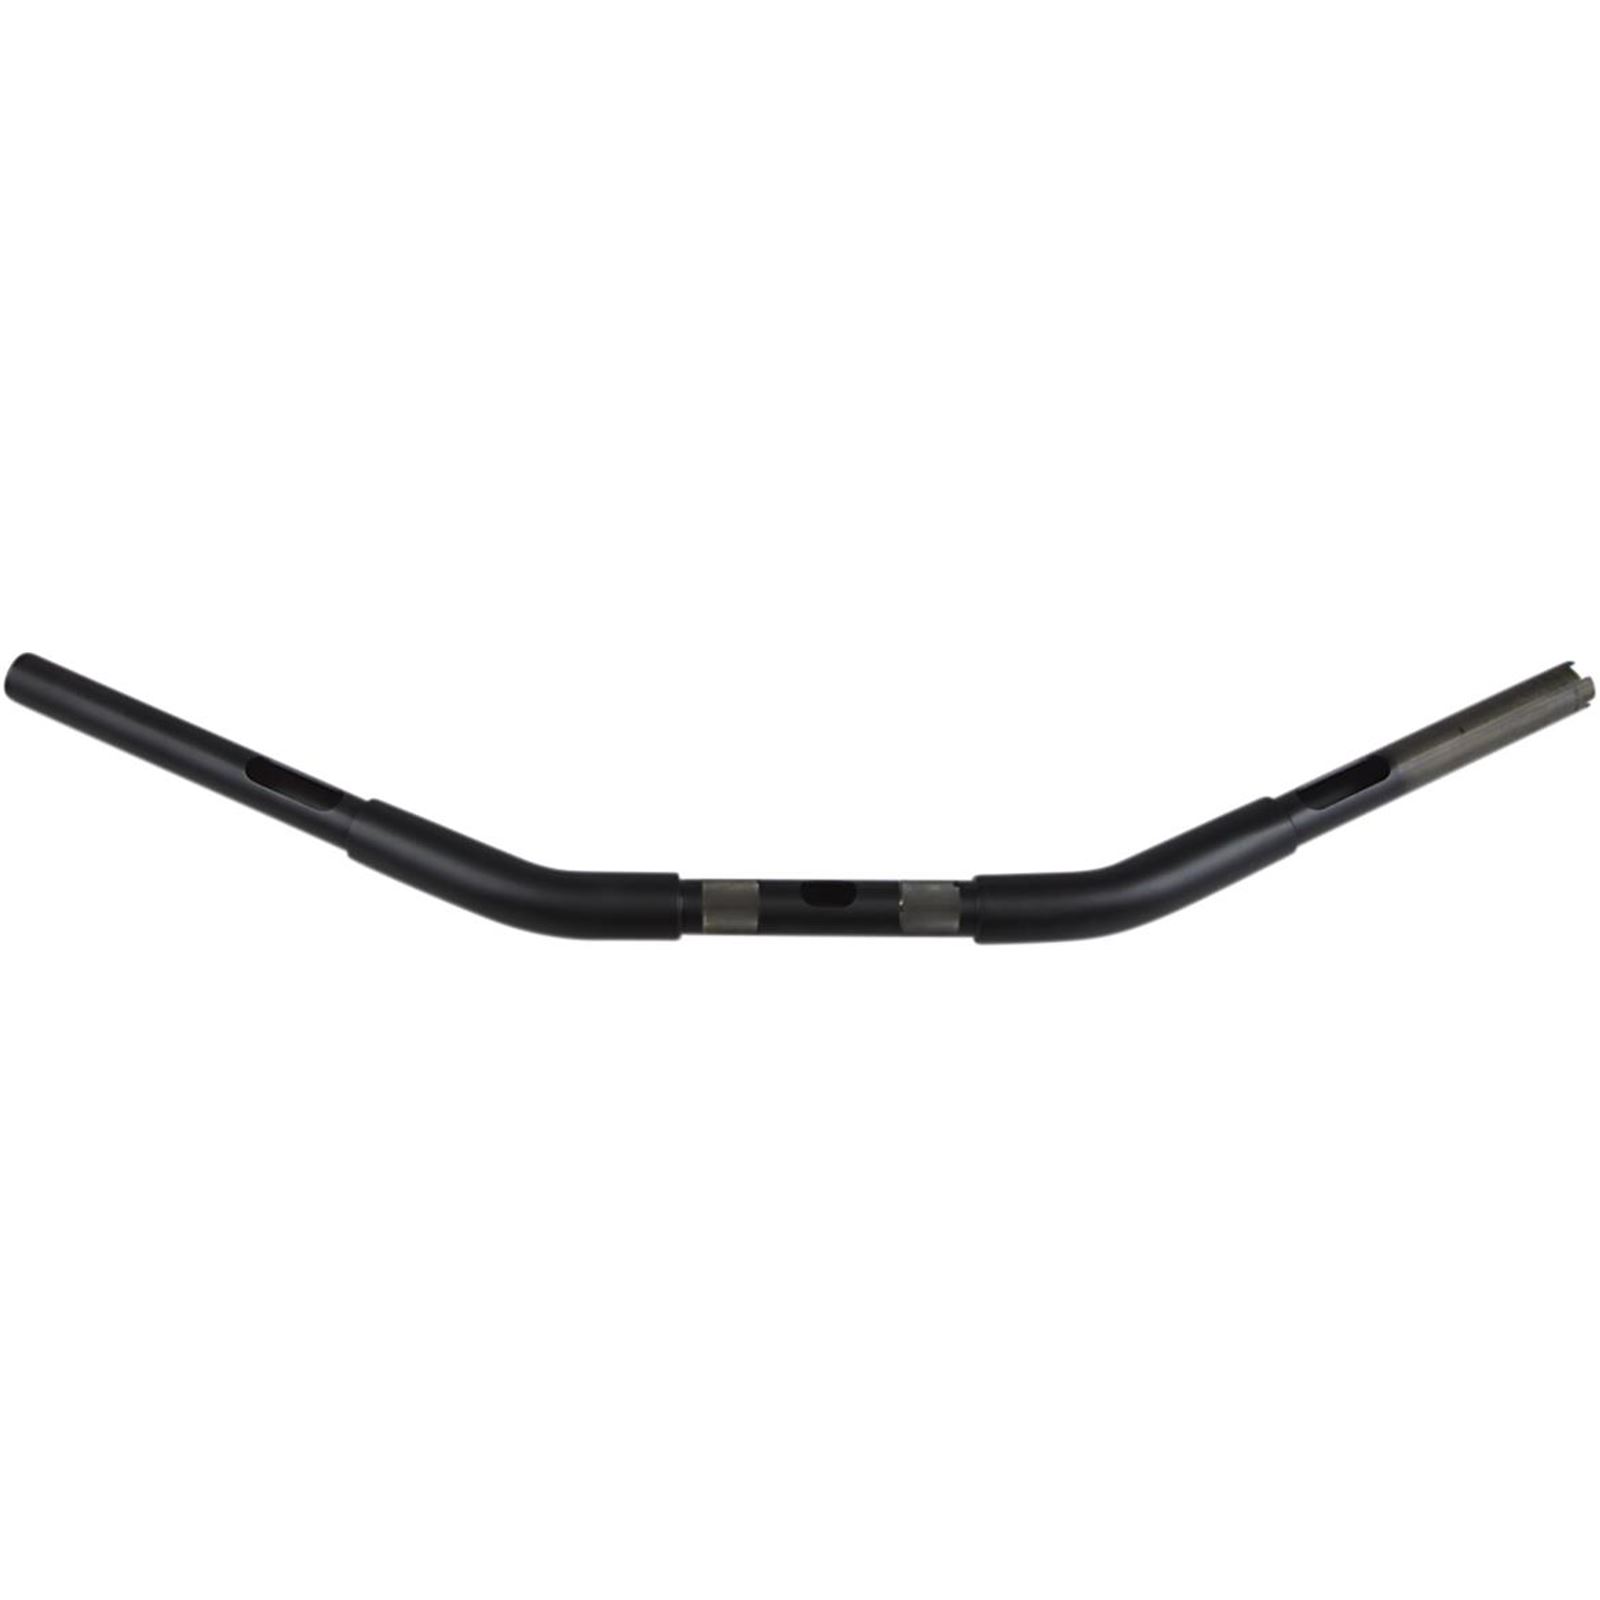 Drag Specialties Flat Black Dragster Handlebar for Throttle-by-Wire